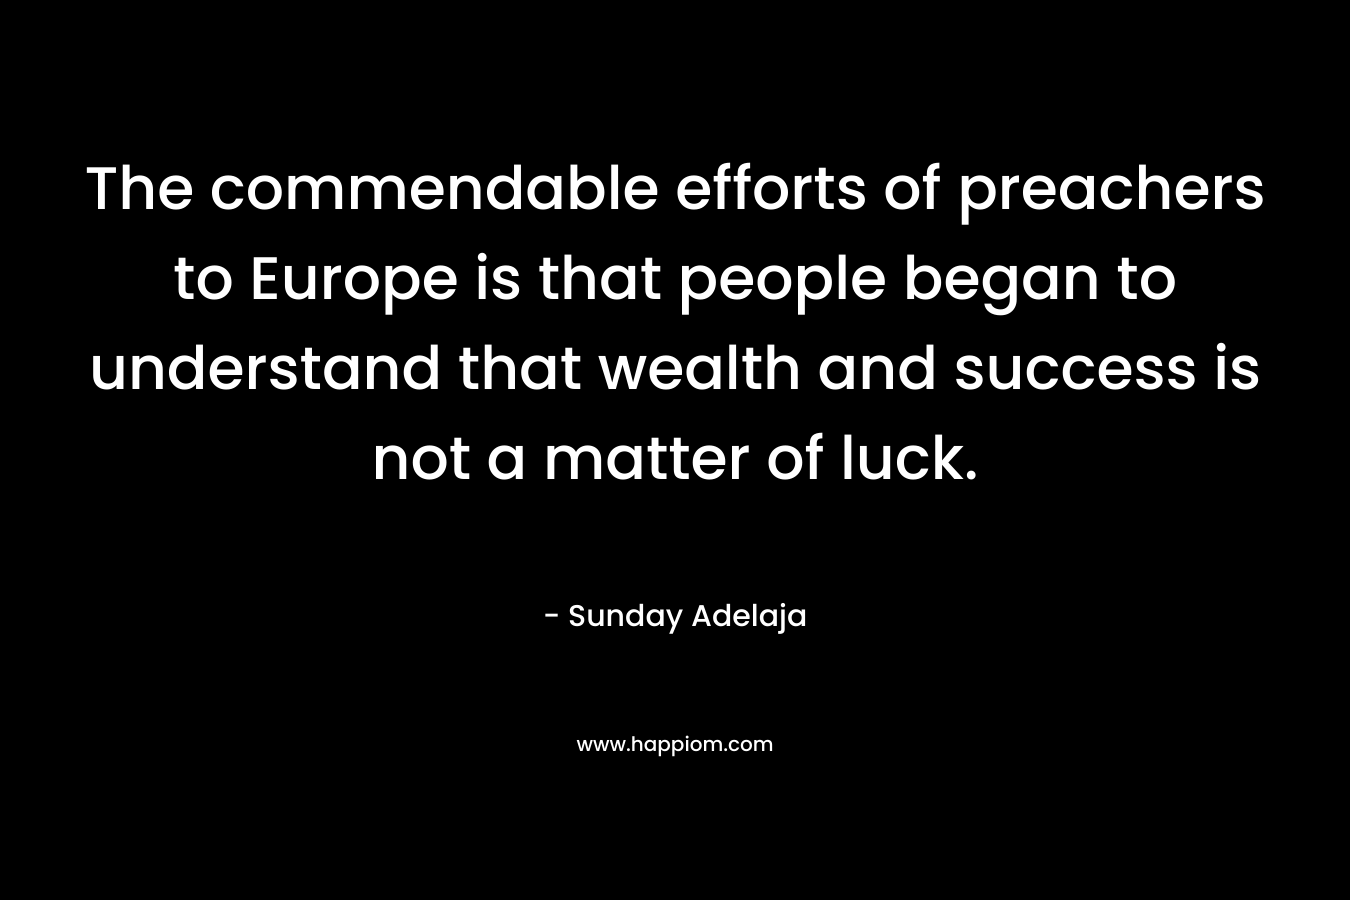 The commendable efforts of preachers to Europe is that people began to understand that wealth and success is not a matter of luck.